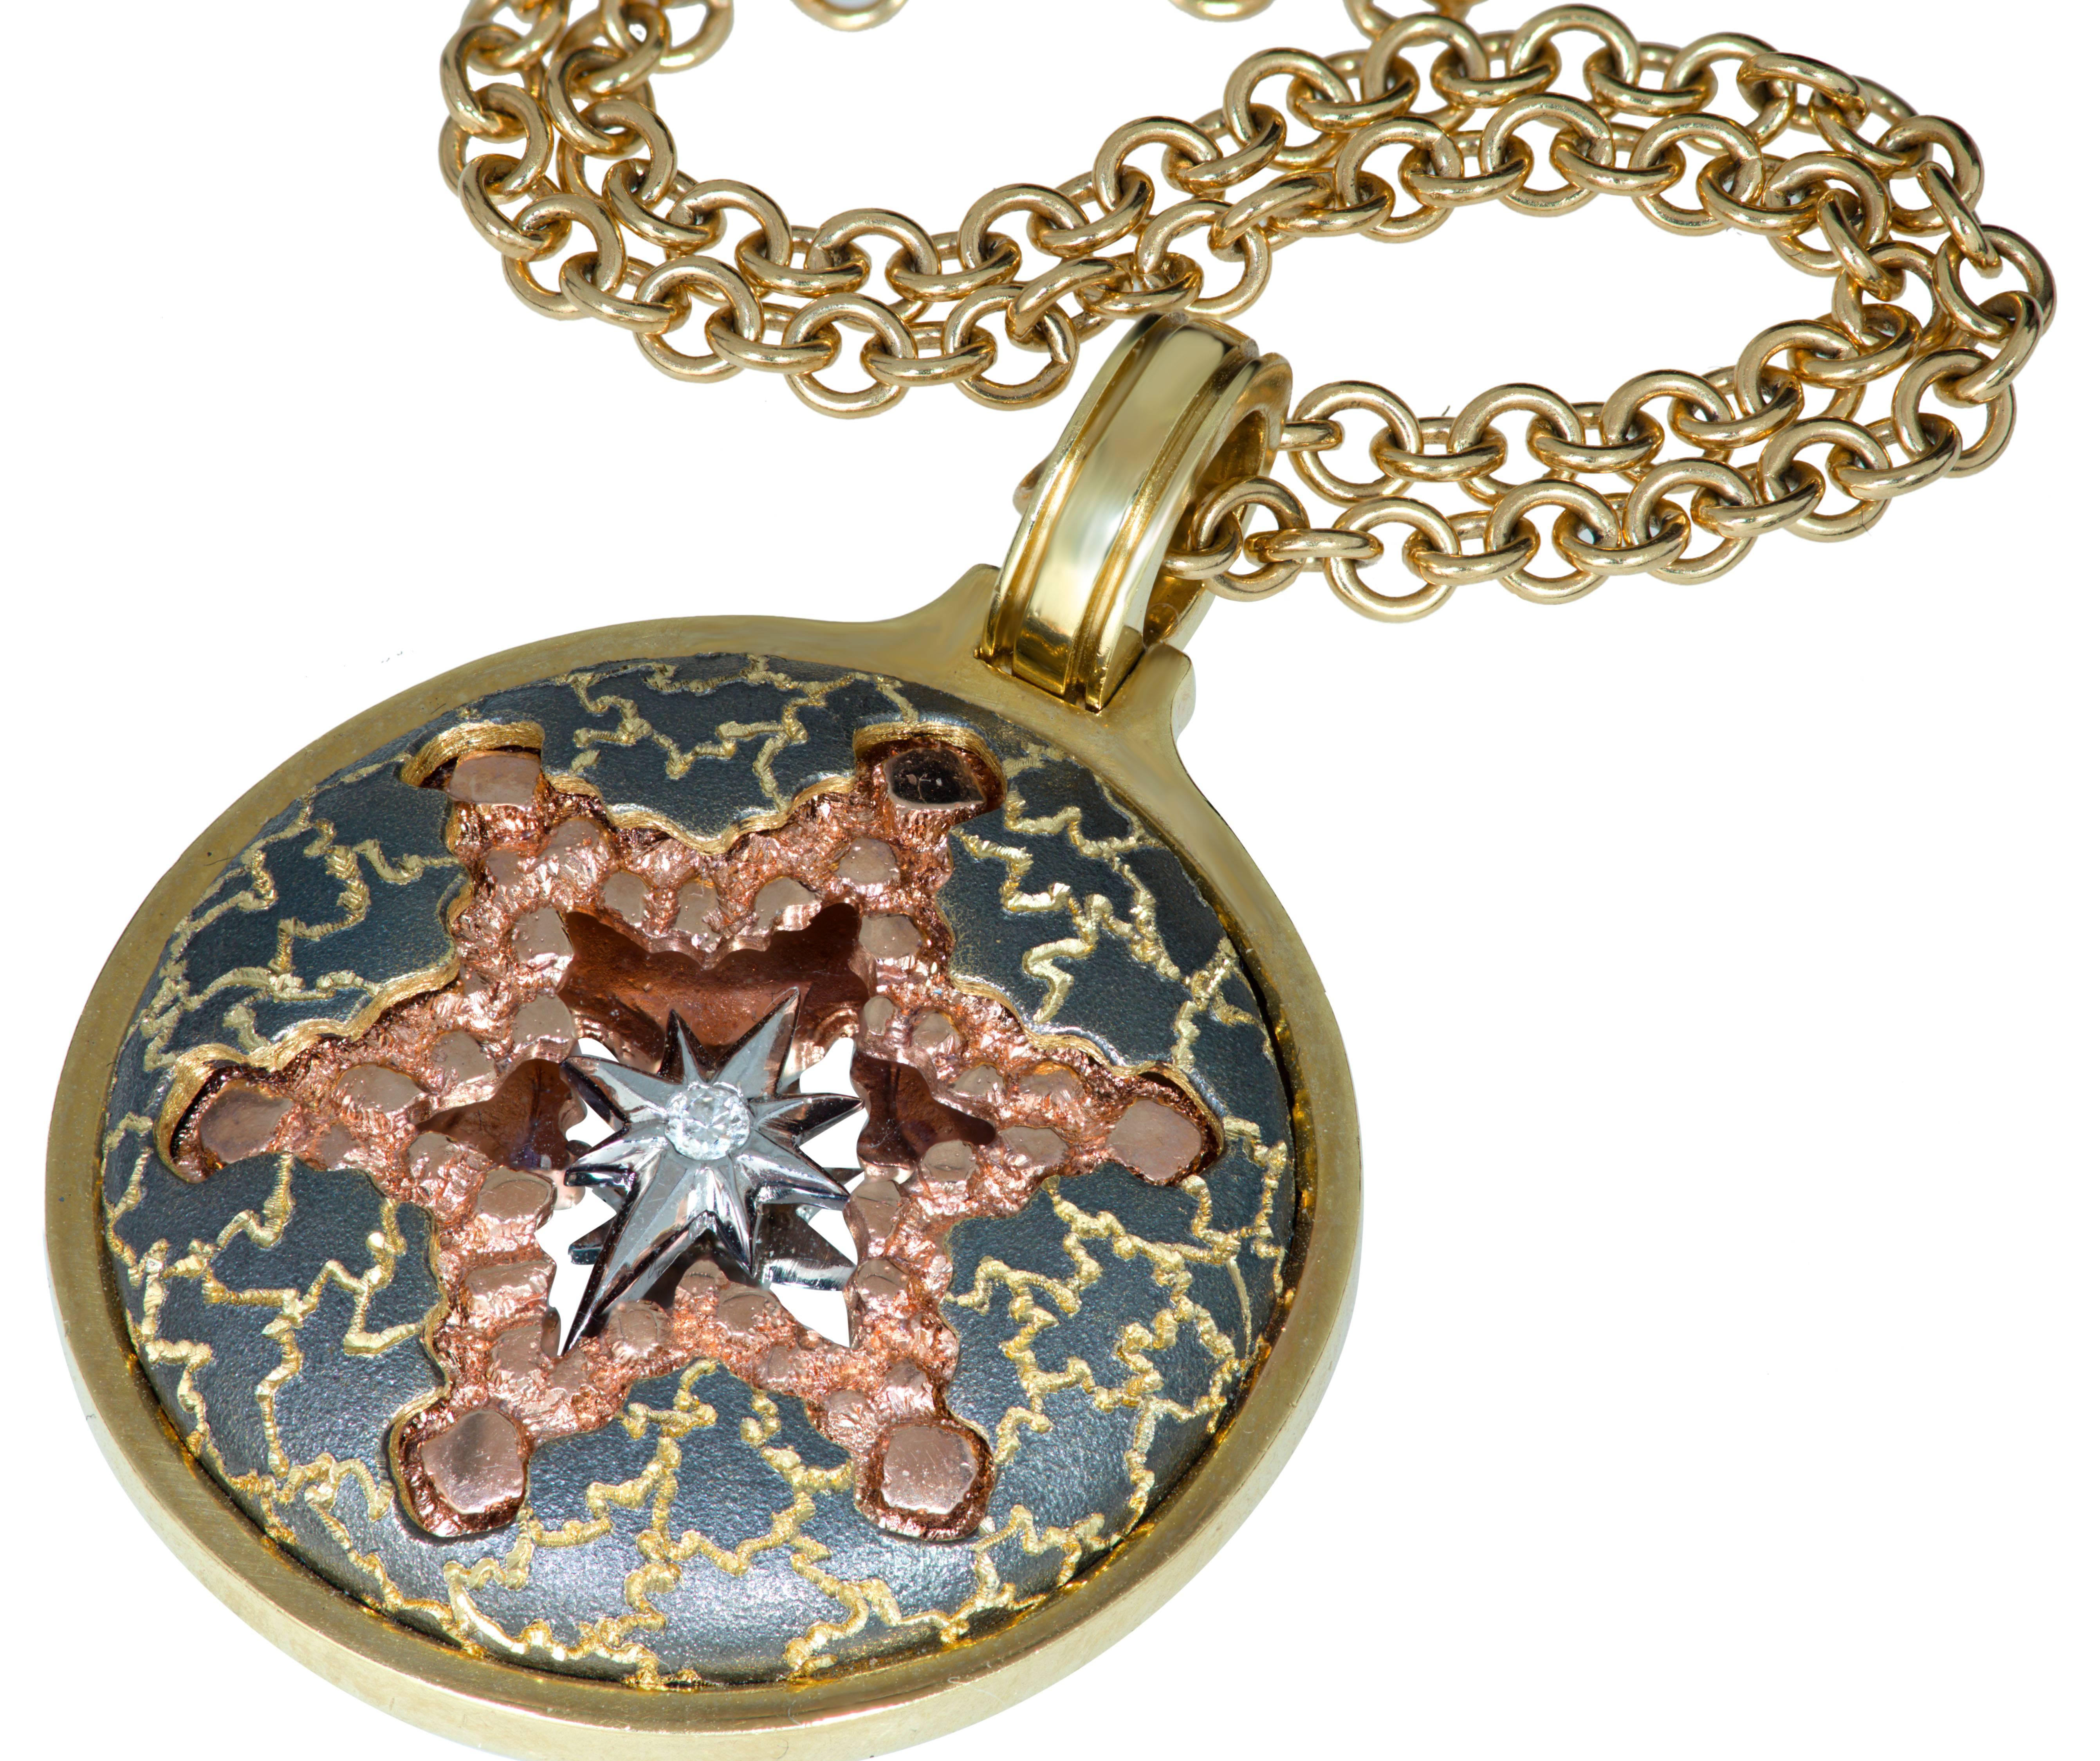 Alex Soldier Diamond Gold Star pendant in 18 karat white, yellow and rose gold features a special mirror effect to enhance multi-dimensional appeal. The composition is further enhanced with final touches of fine texturing, hand-applied in several